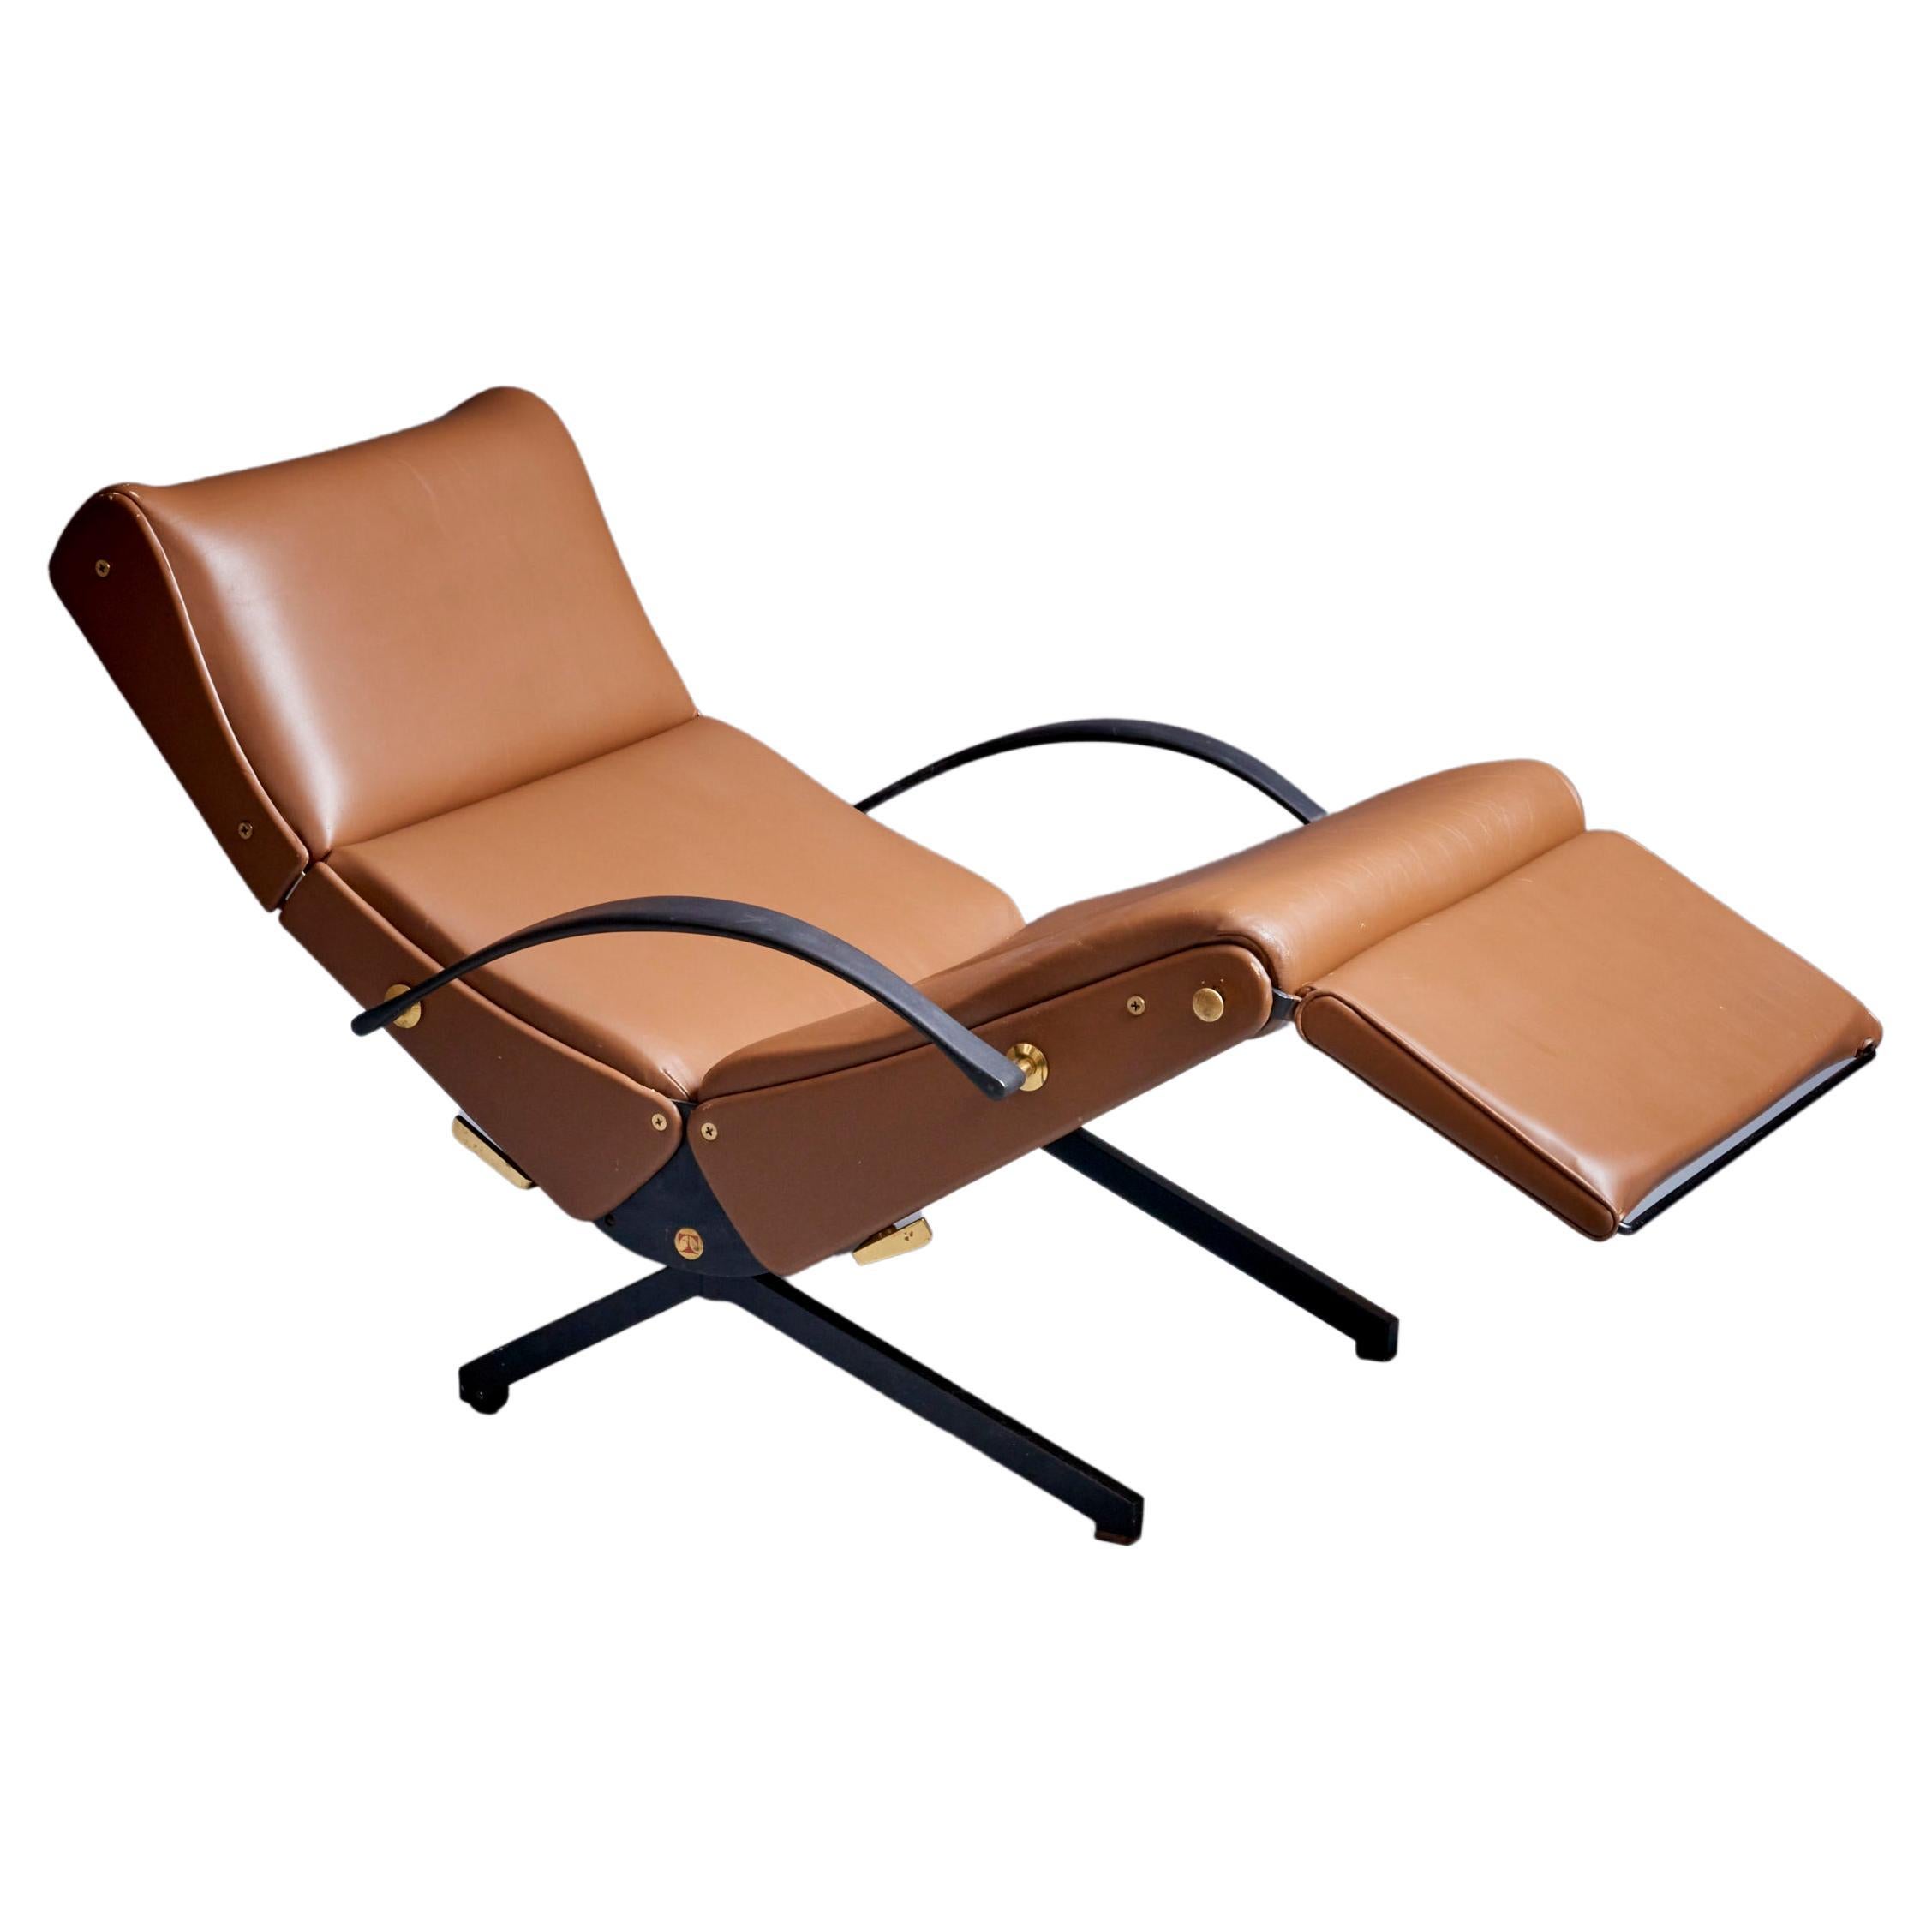 P40 Lounge Chair by Osvaldo Borsani for Tecno in Brown Leather